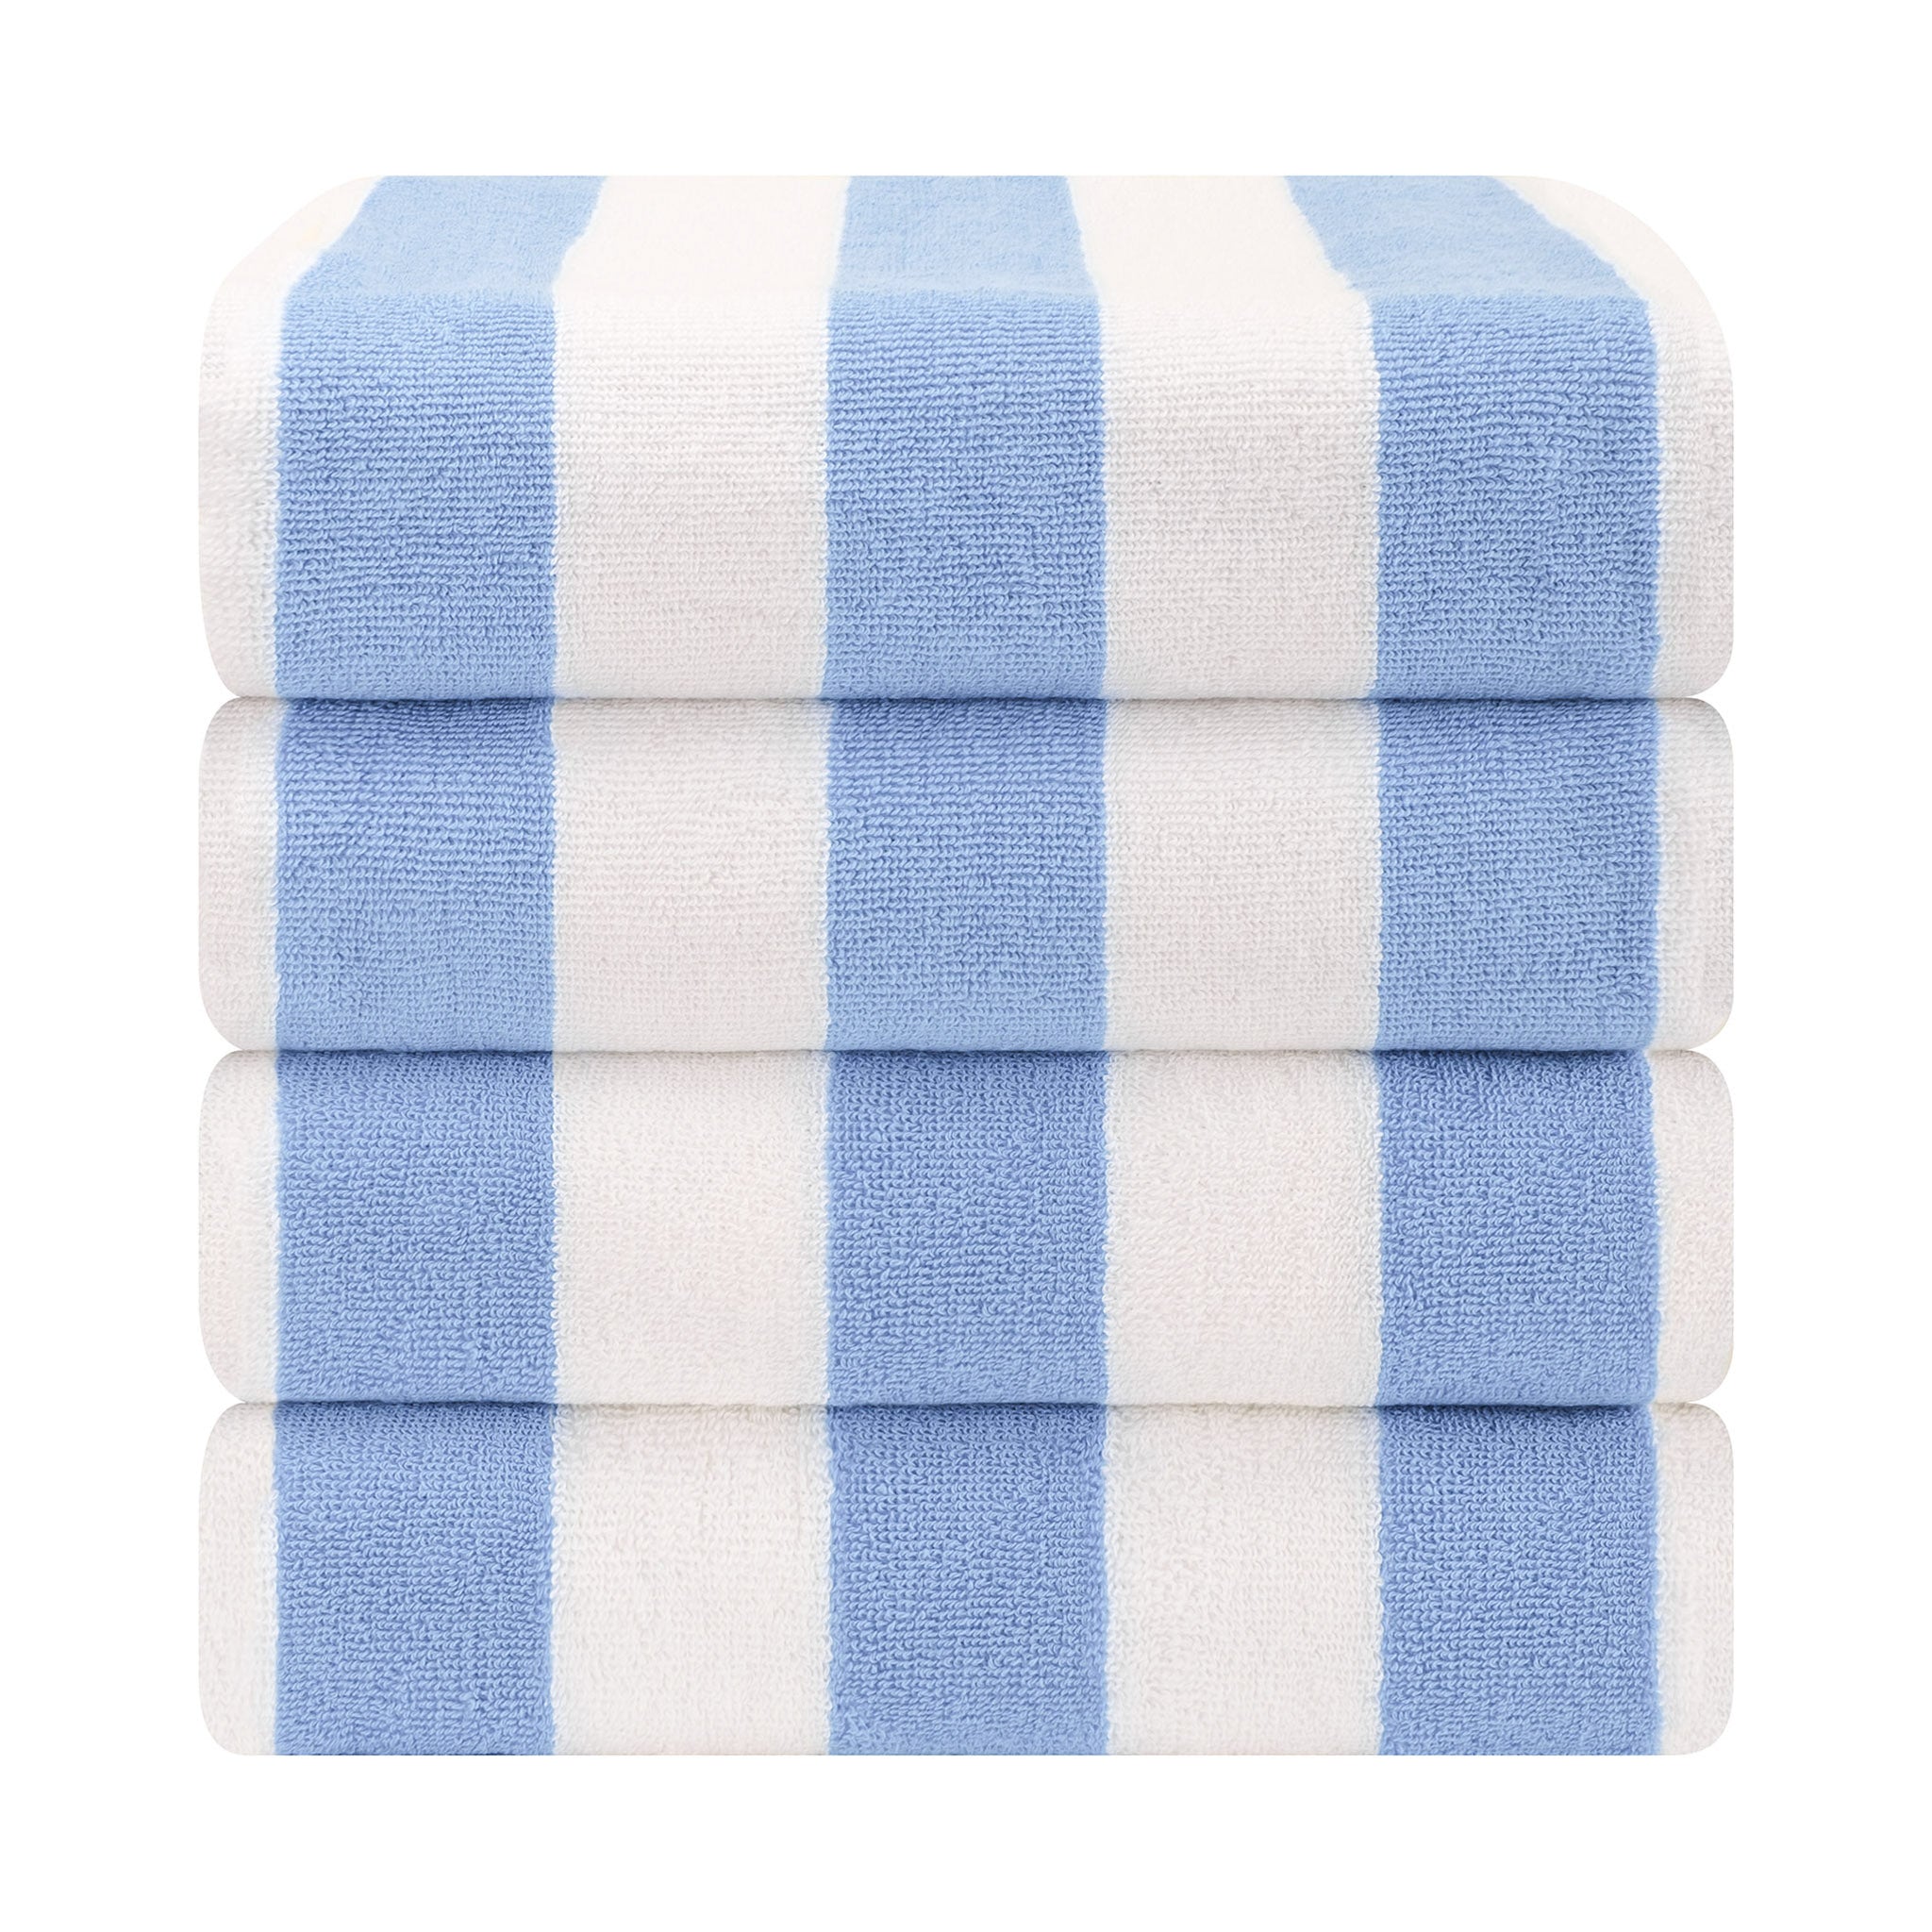 American Soft Linen 100% Cotton 4 Pack Beach Towels Cabana Striped Pool Towels -sky-blue-2